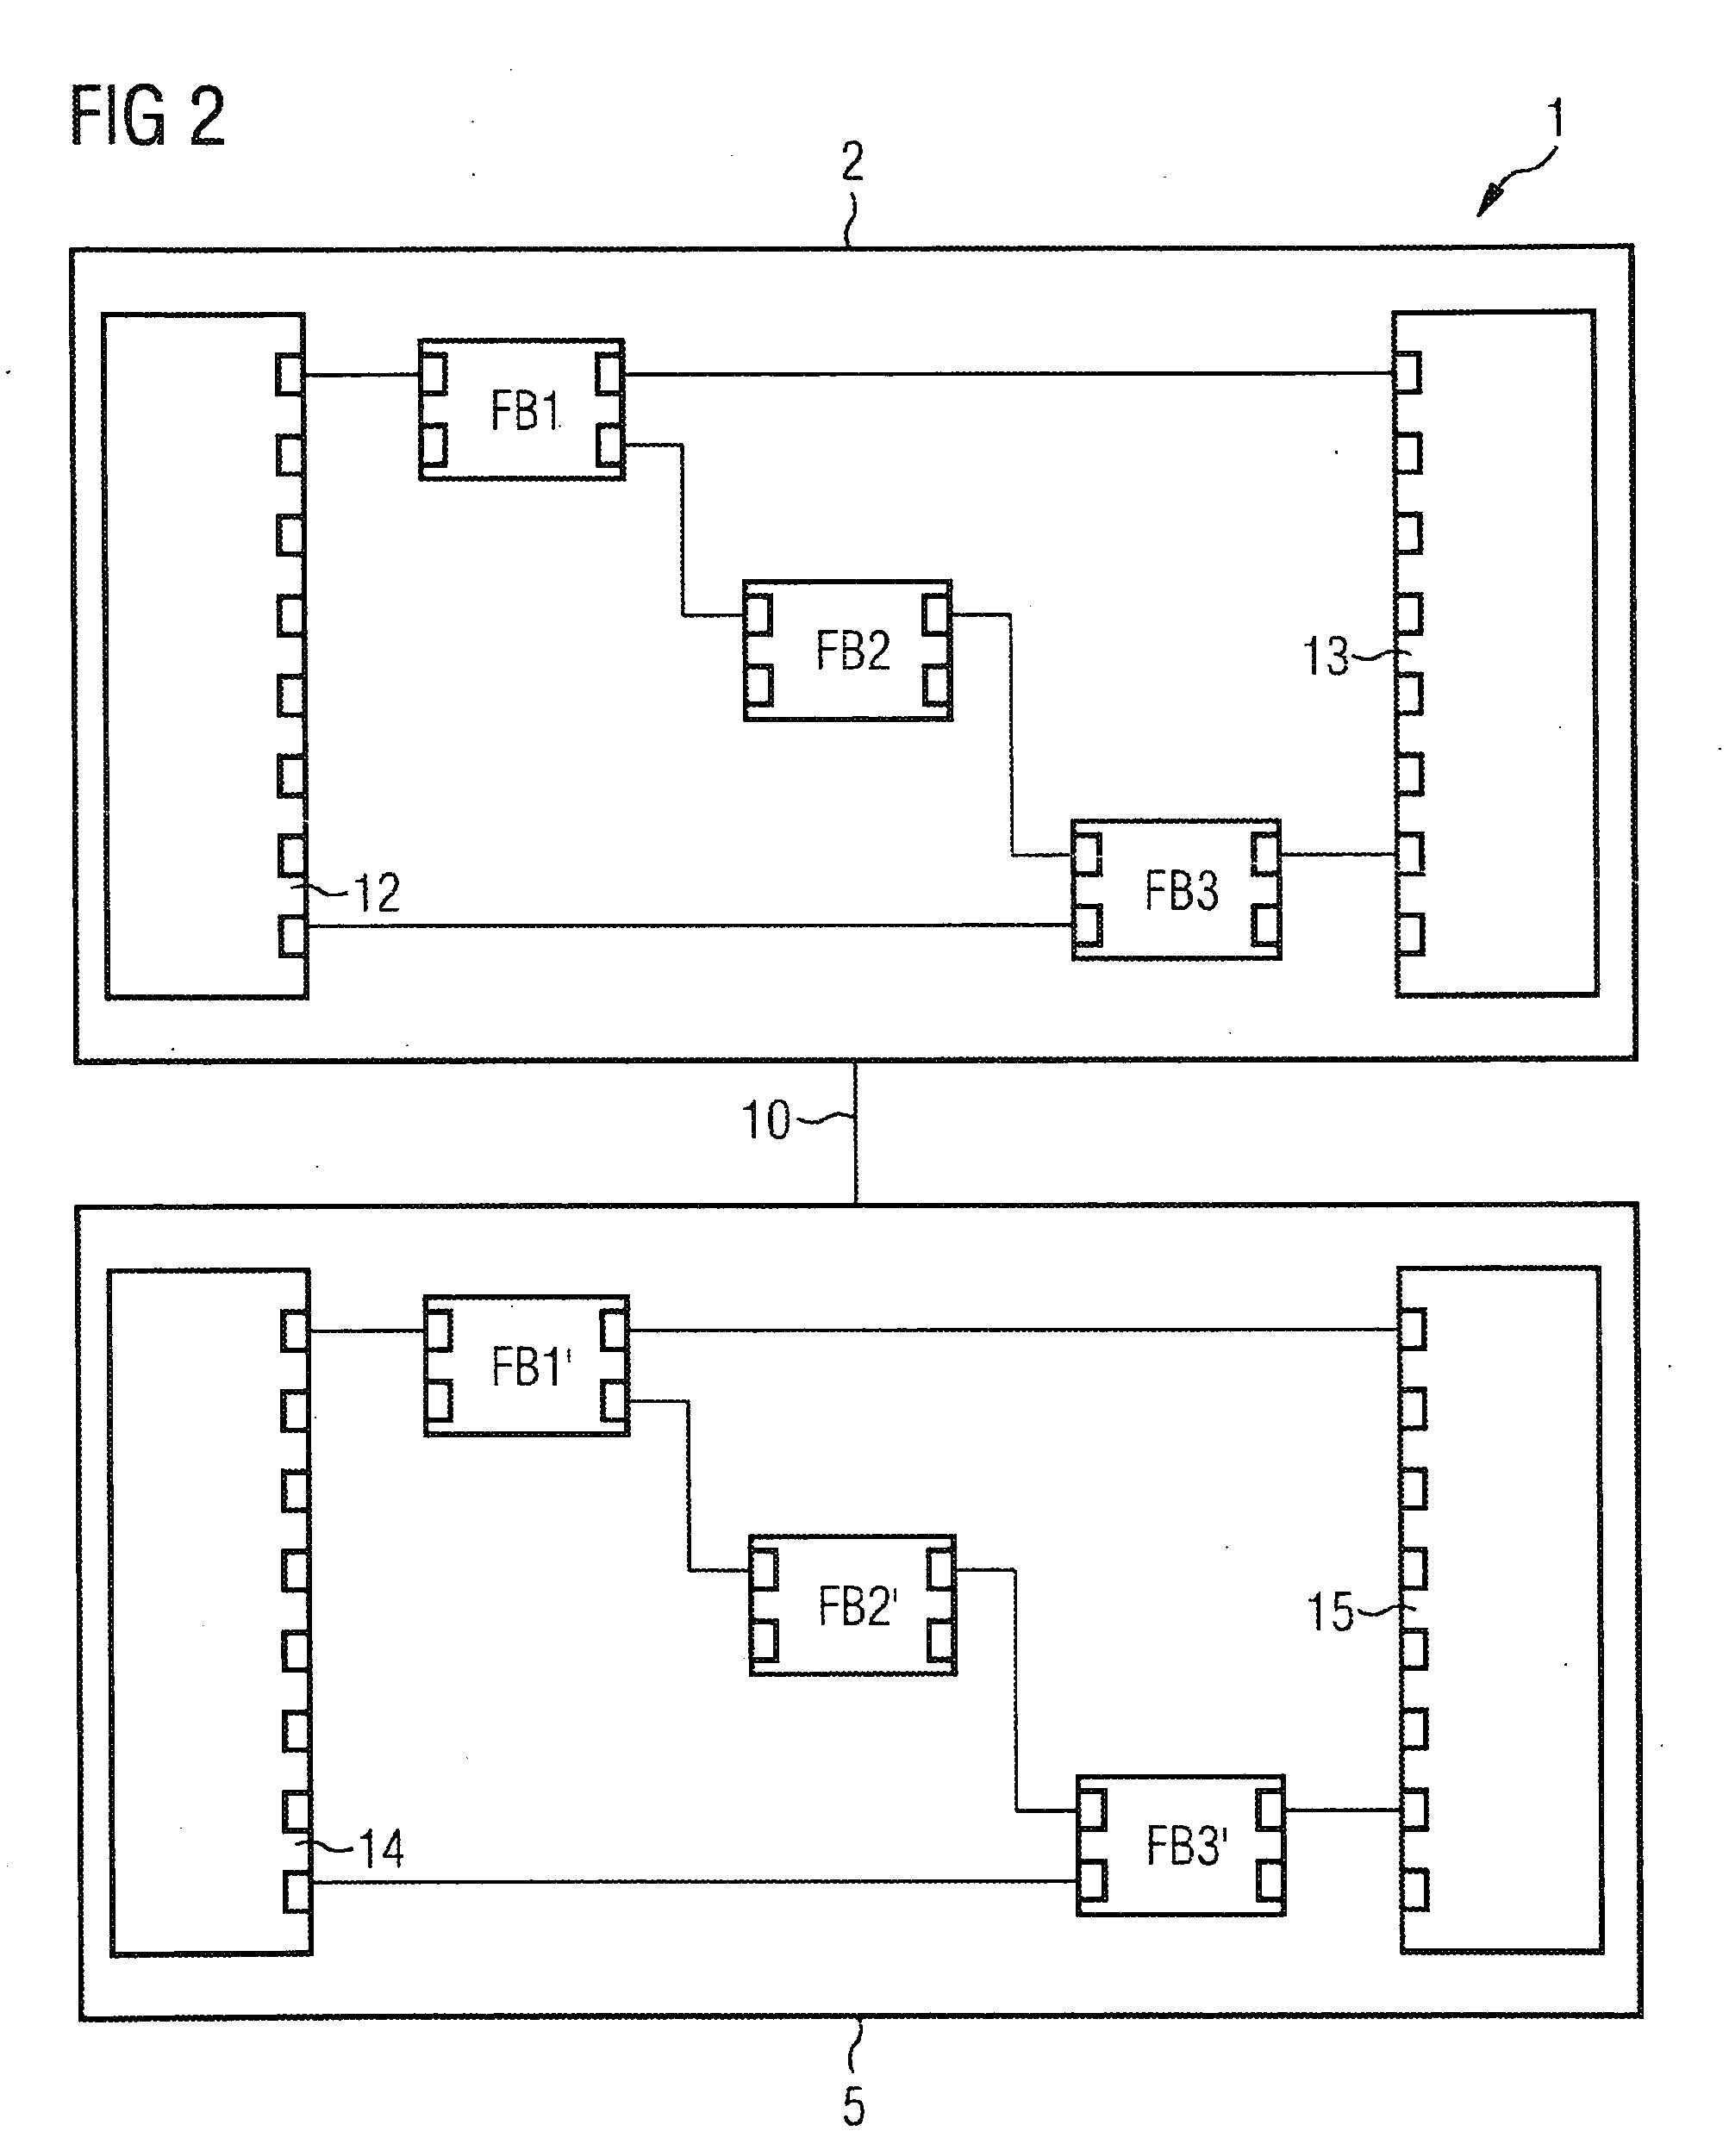 Method for synchronizing two control devices, and redundantly designed automation system